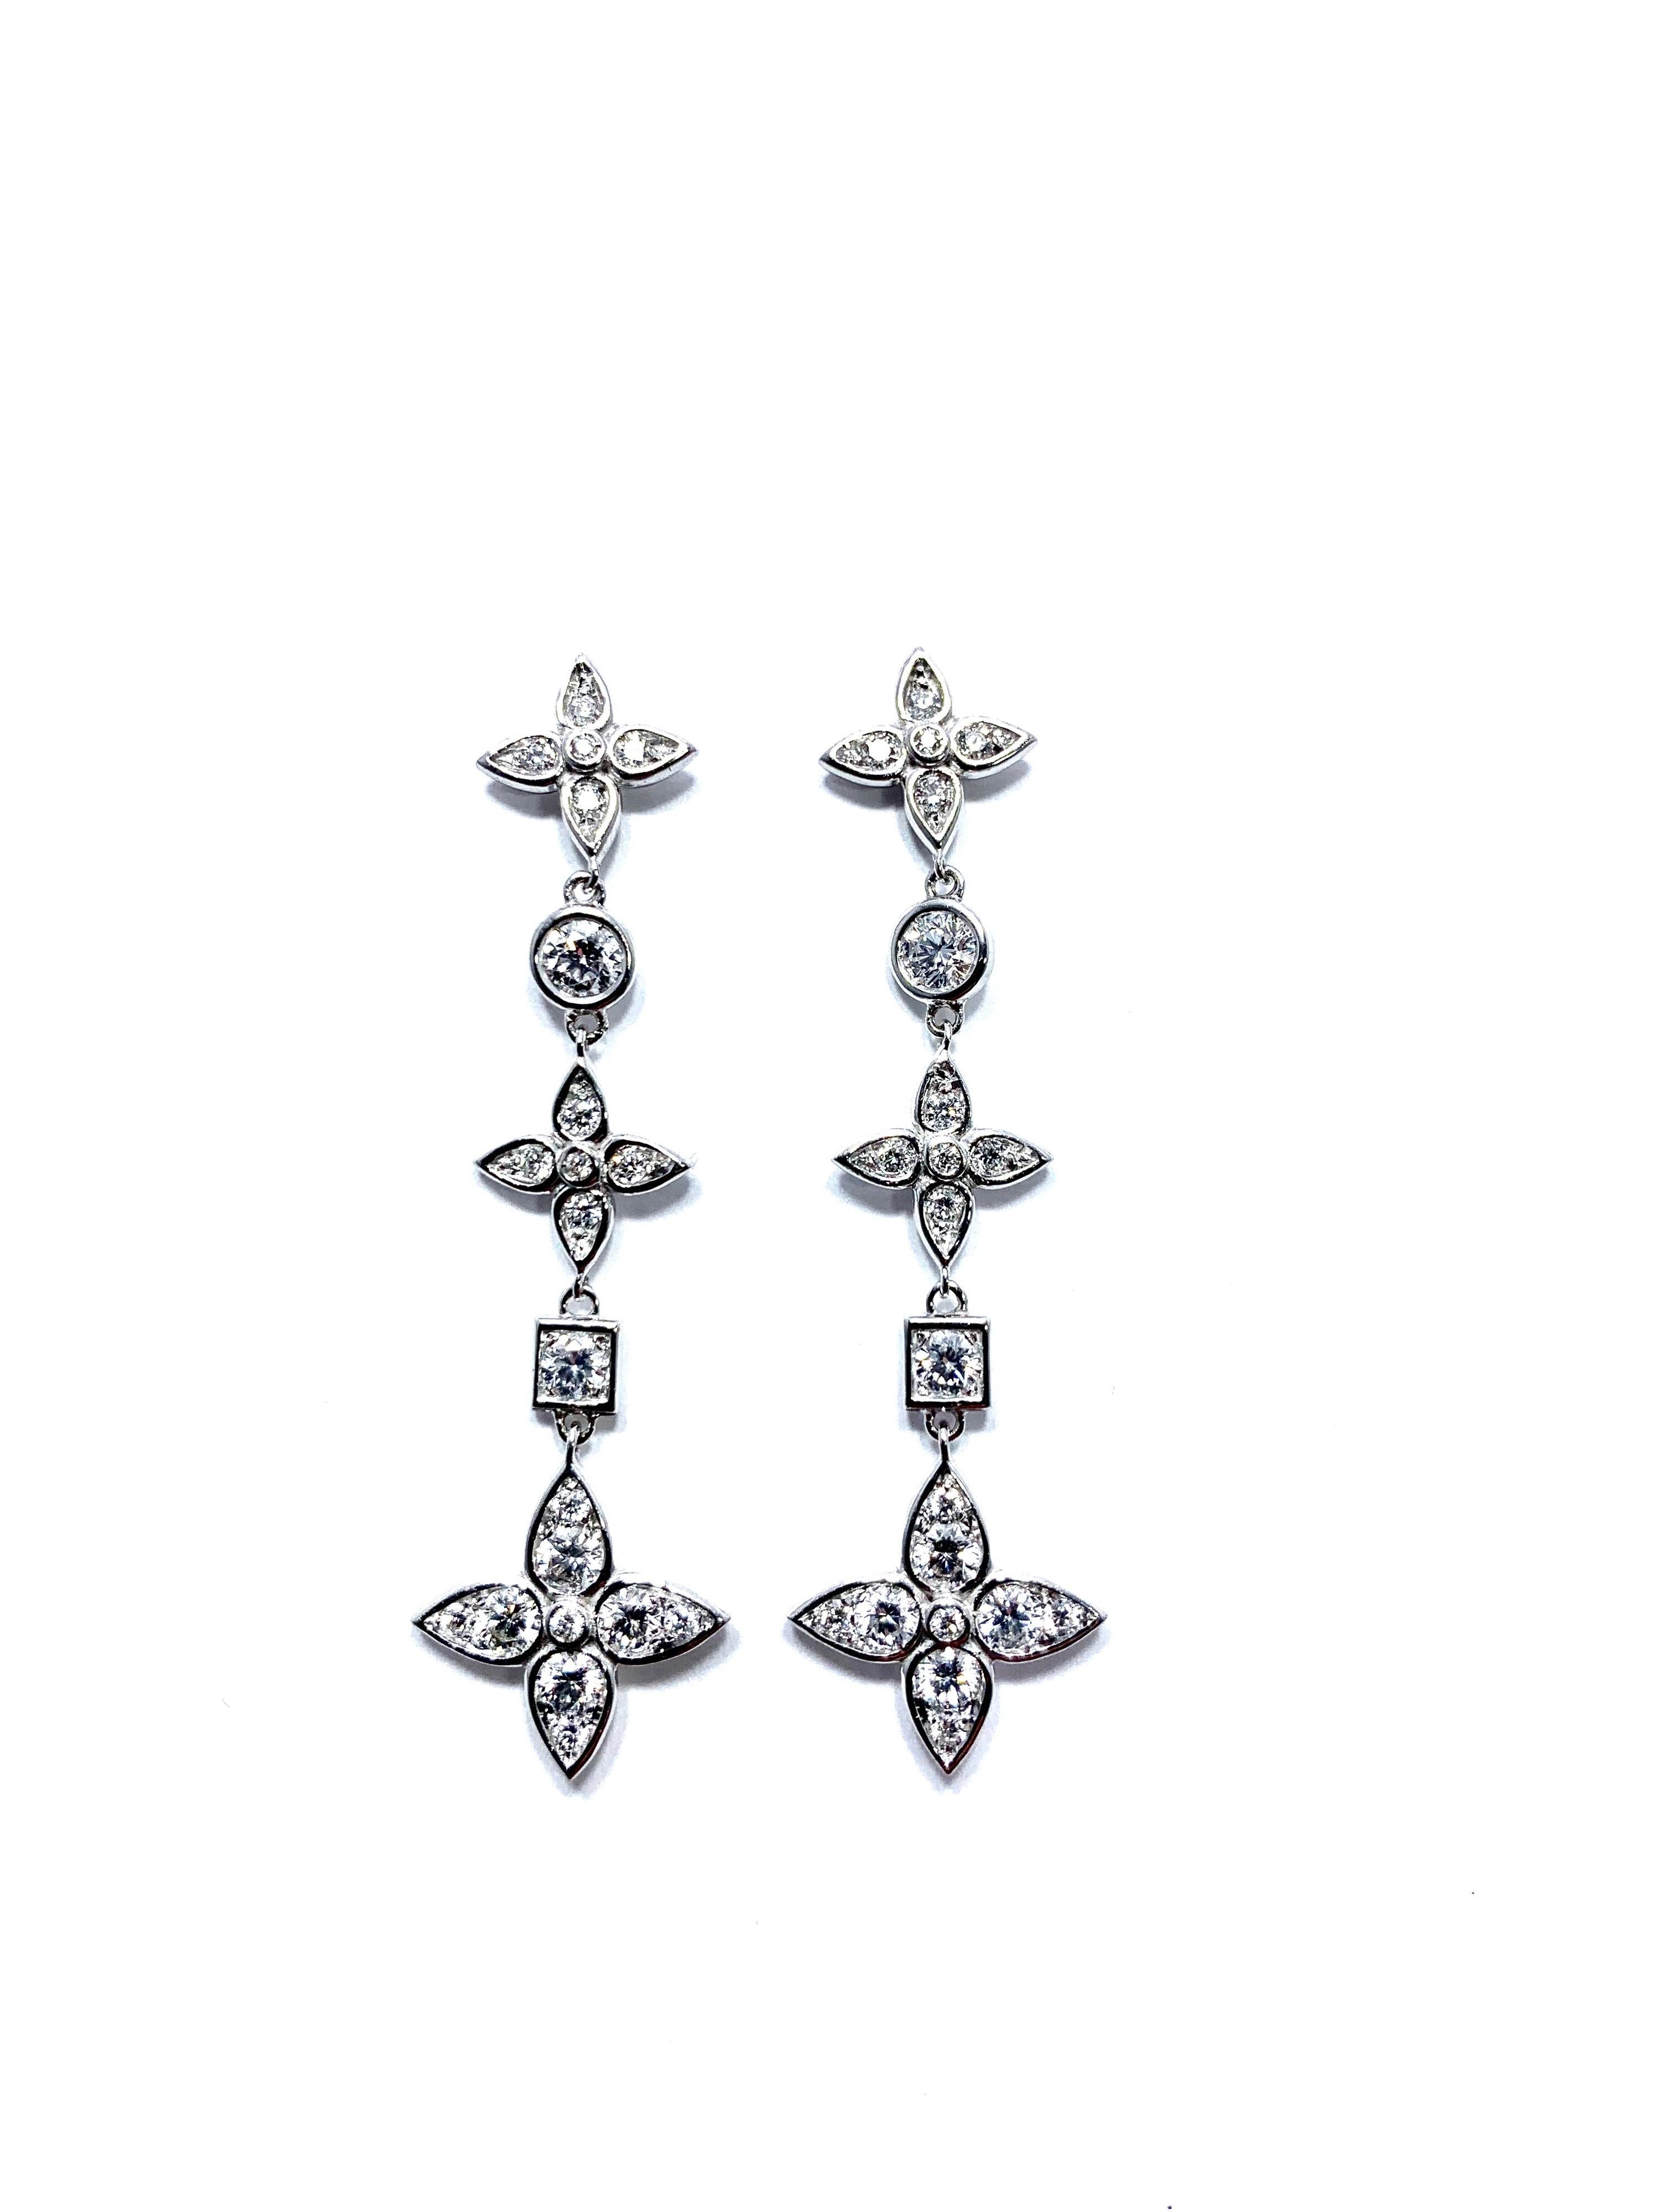 Handcrafted in Italy by Mariani Gioielli this stunning pair of Diamond drop earrings will light up the night!  The 42 round brilliant Diamonds have a total weight of 1.92 carats set in 18 karat white gold.  They are E/F color, VVS2 clarity.  The